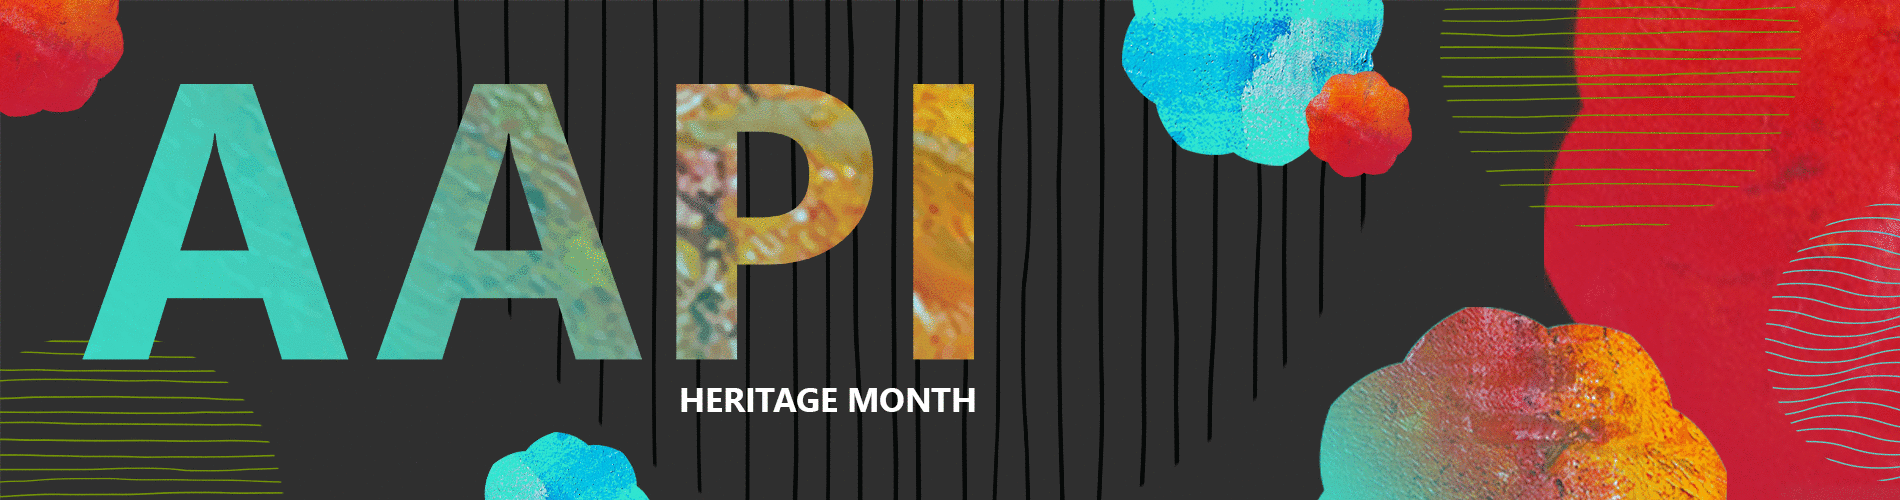 Collection of colorful lines and floral textures on a grey background. Words read: AAPI Heritage Month